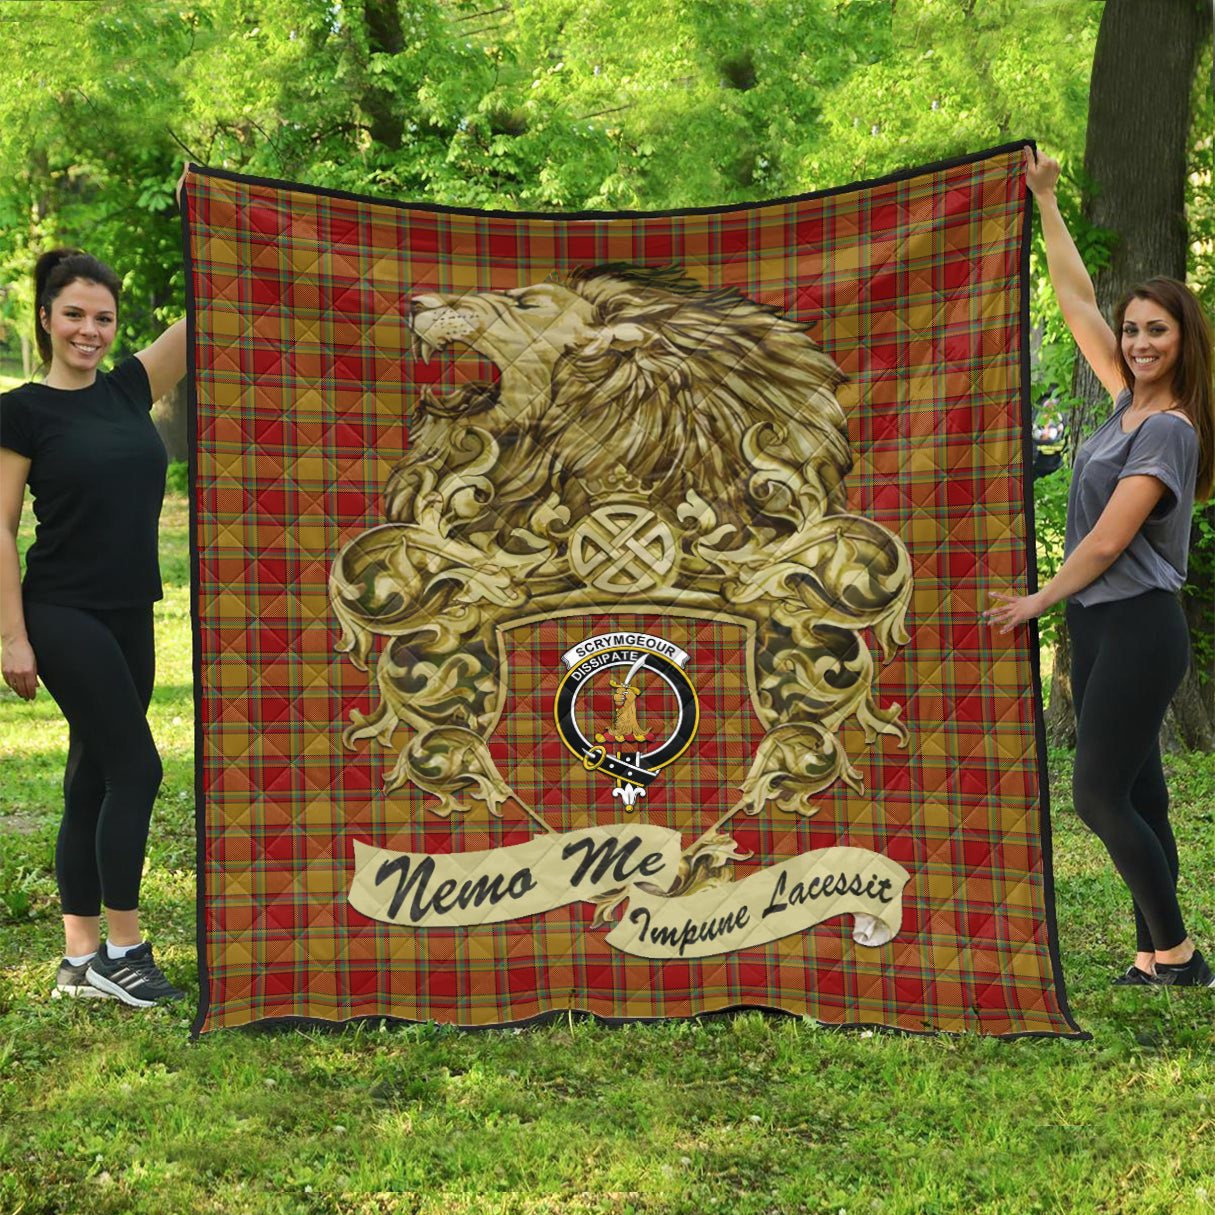 scrymgeour-tartan-quilt-with-motto-nemo-me-impune-lacessit-with-vintage-lion-family-crest-tartan-quilt-pattern-scottish-tartan-plaid-quilt-vintage-style